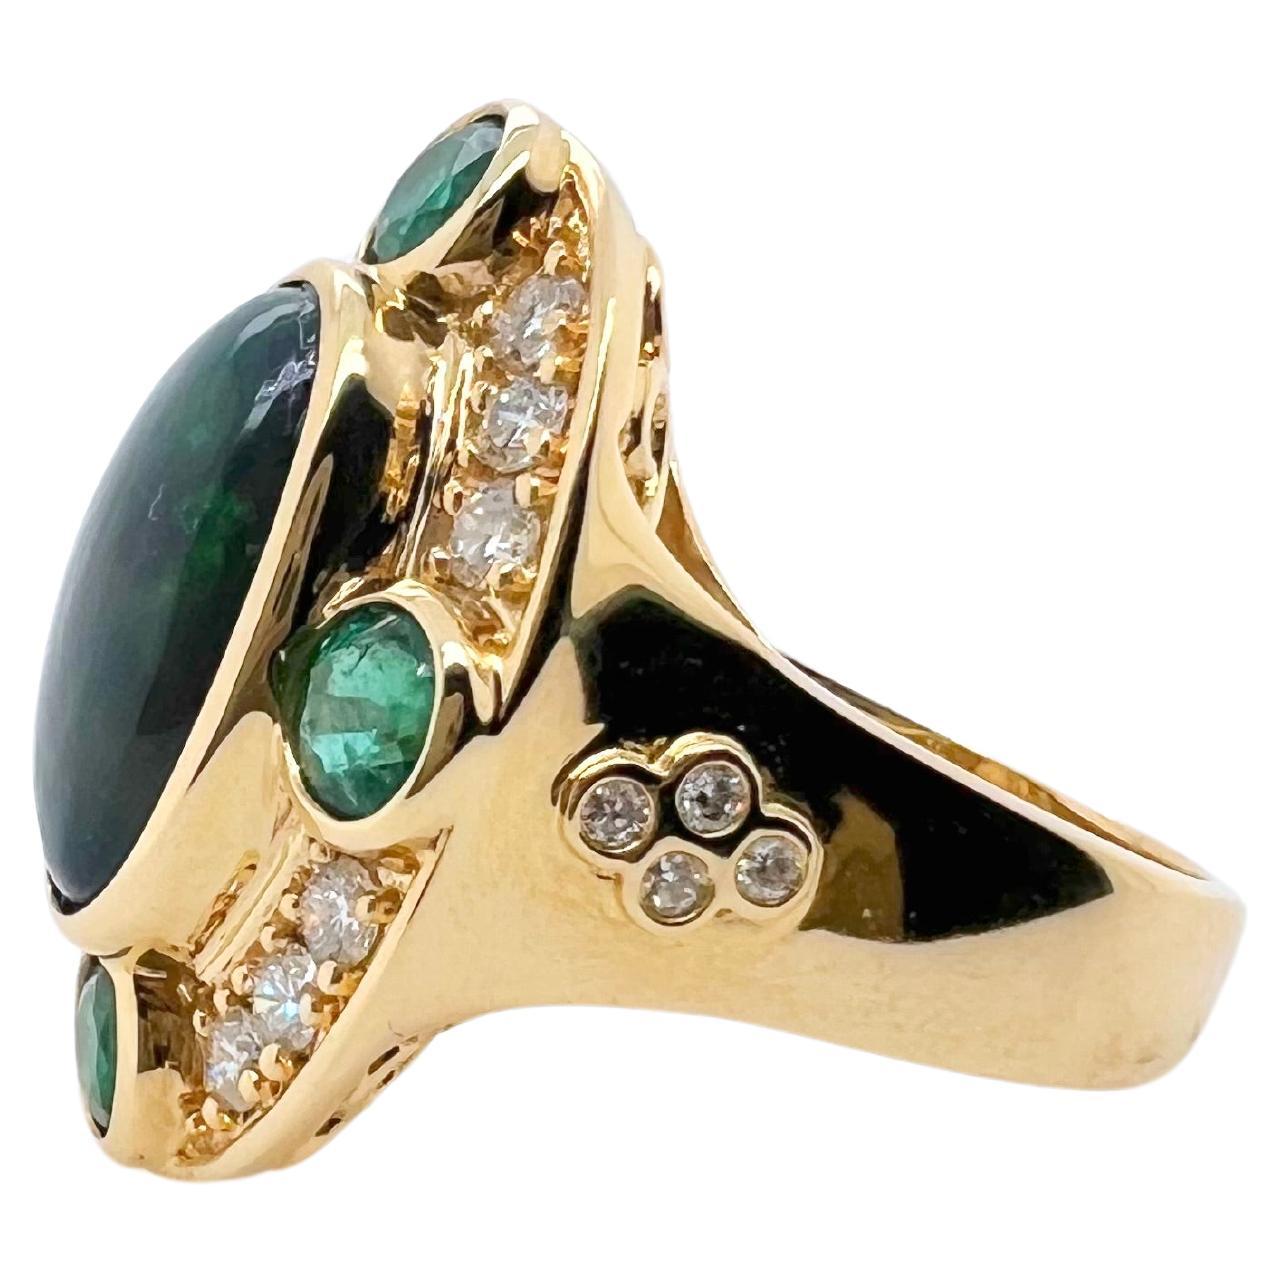 This gorgeous black Ethiopian is bezel set in this handmade 18k yellow gold mounting. There are 4 round green emeralds bezel set that sits on a bed of round brilliant diamonds. The 4 bezel set diamonds on each side of the shank give character to